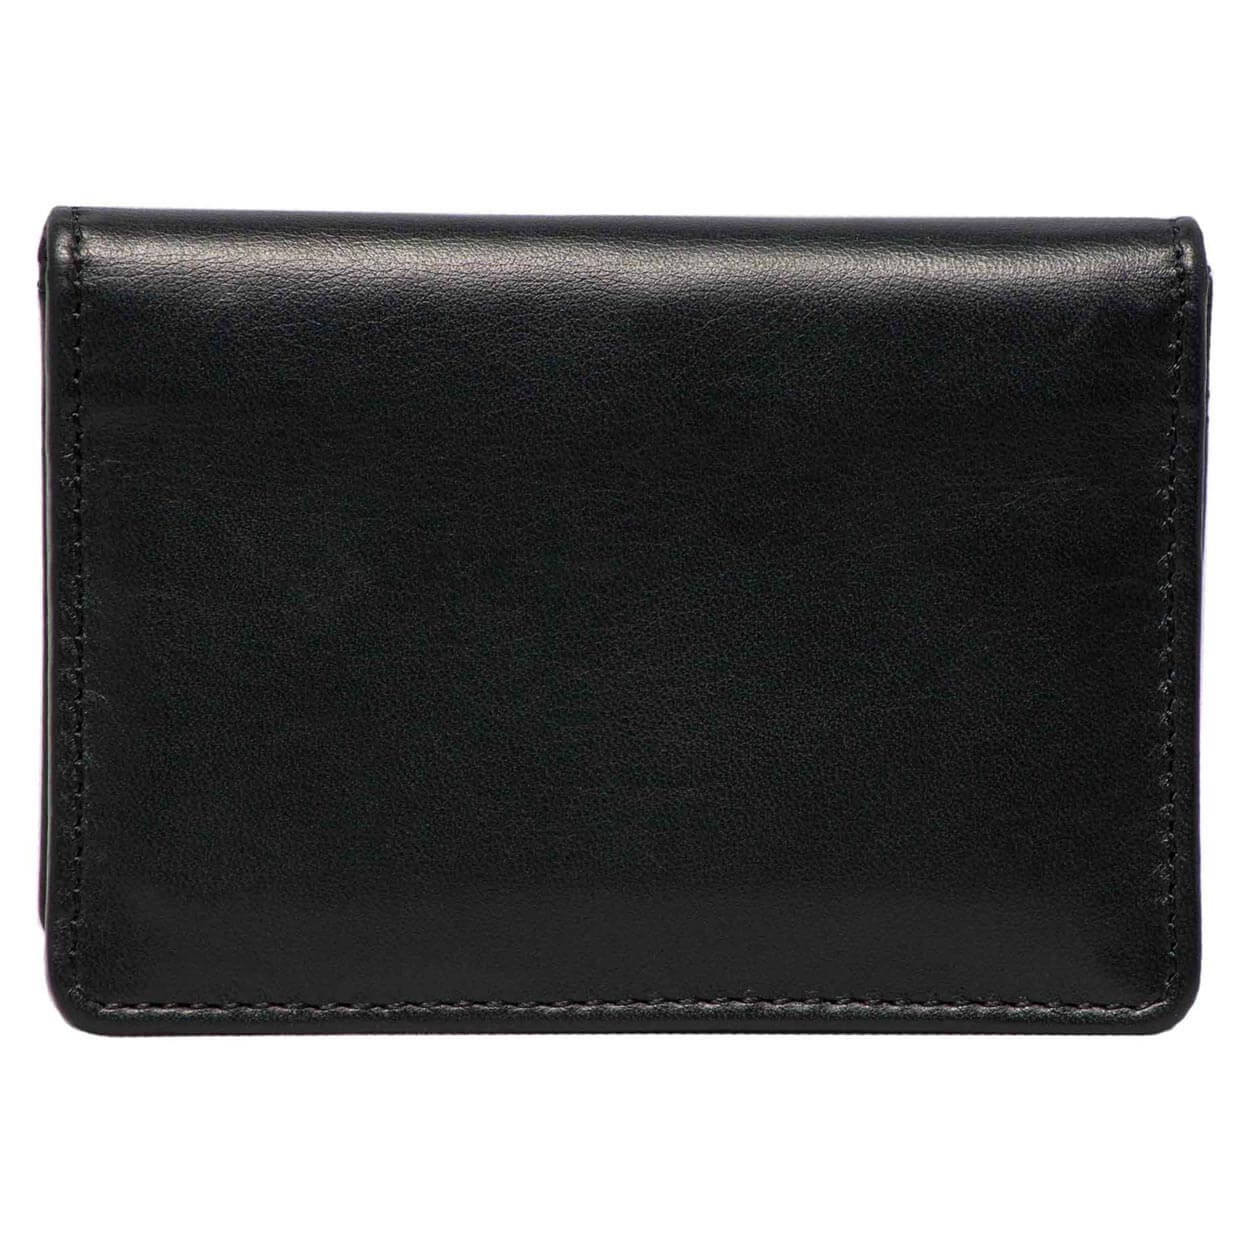 DiLoro Travel Leather Business Card Wallets - Front View